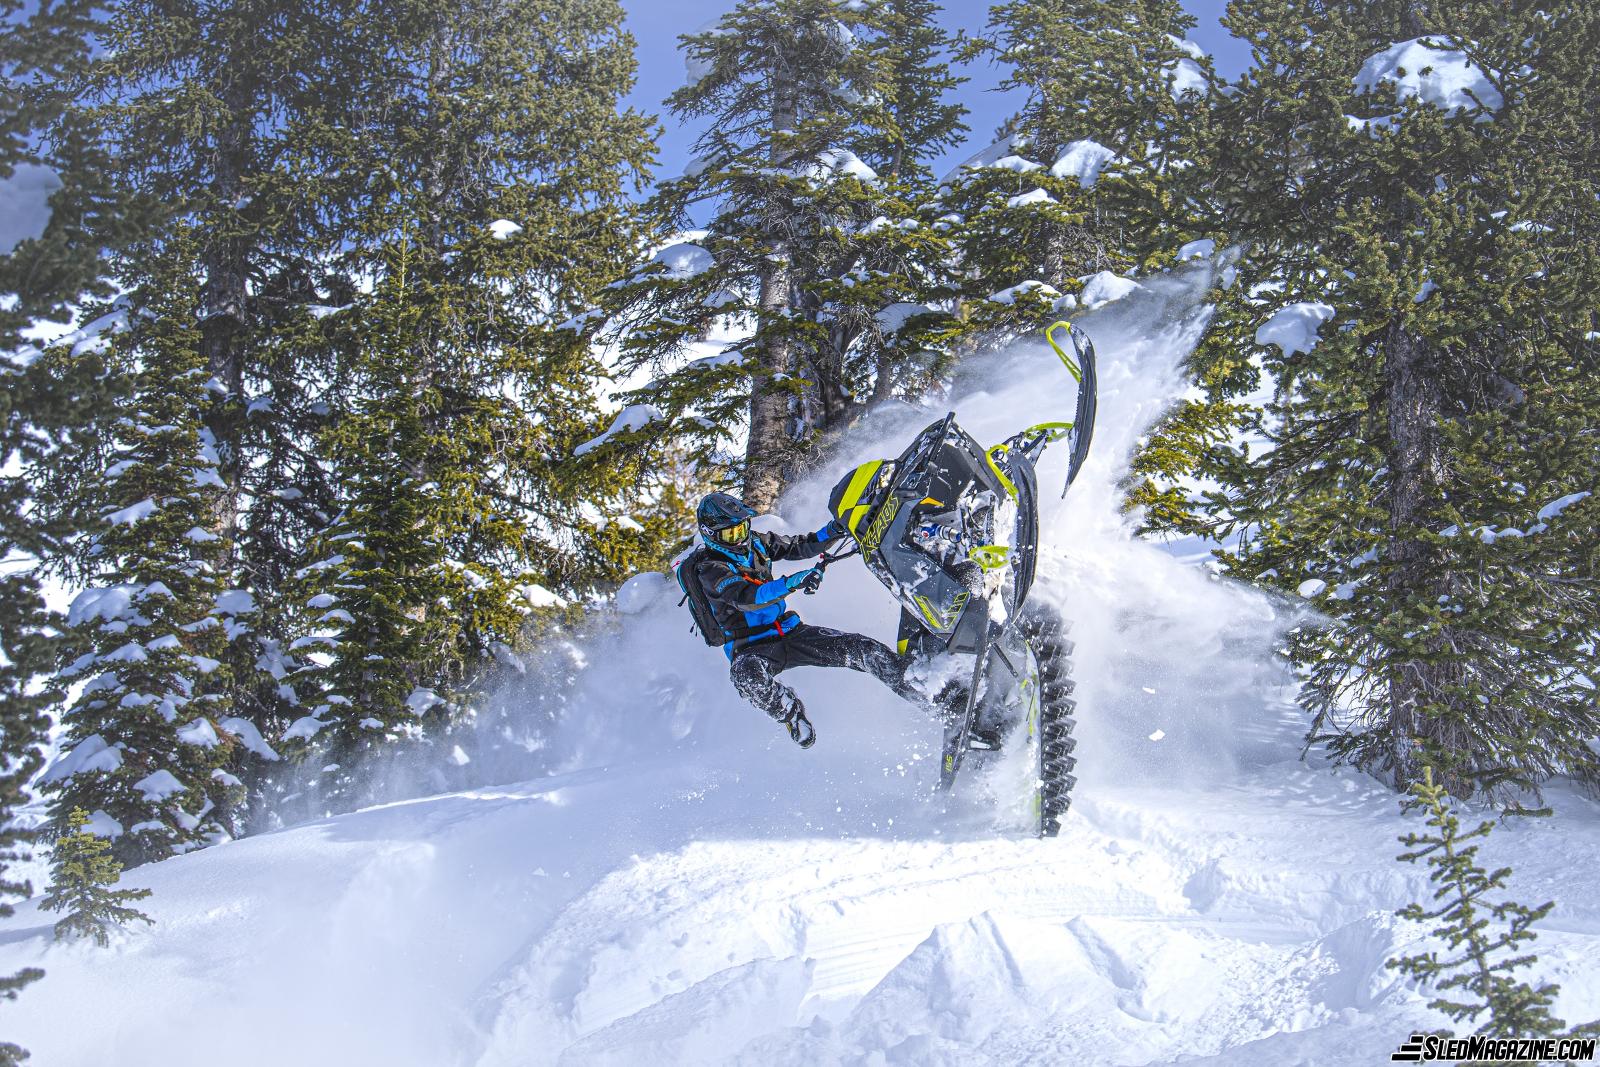 More power in the mountains for the 2022 Polaris snowmobile